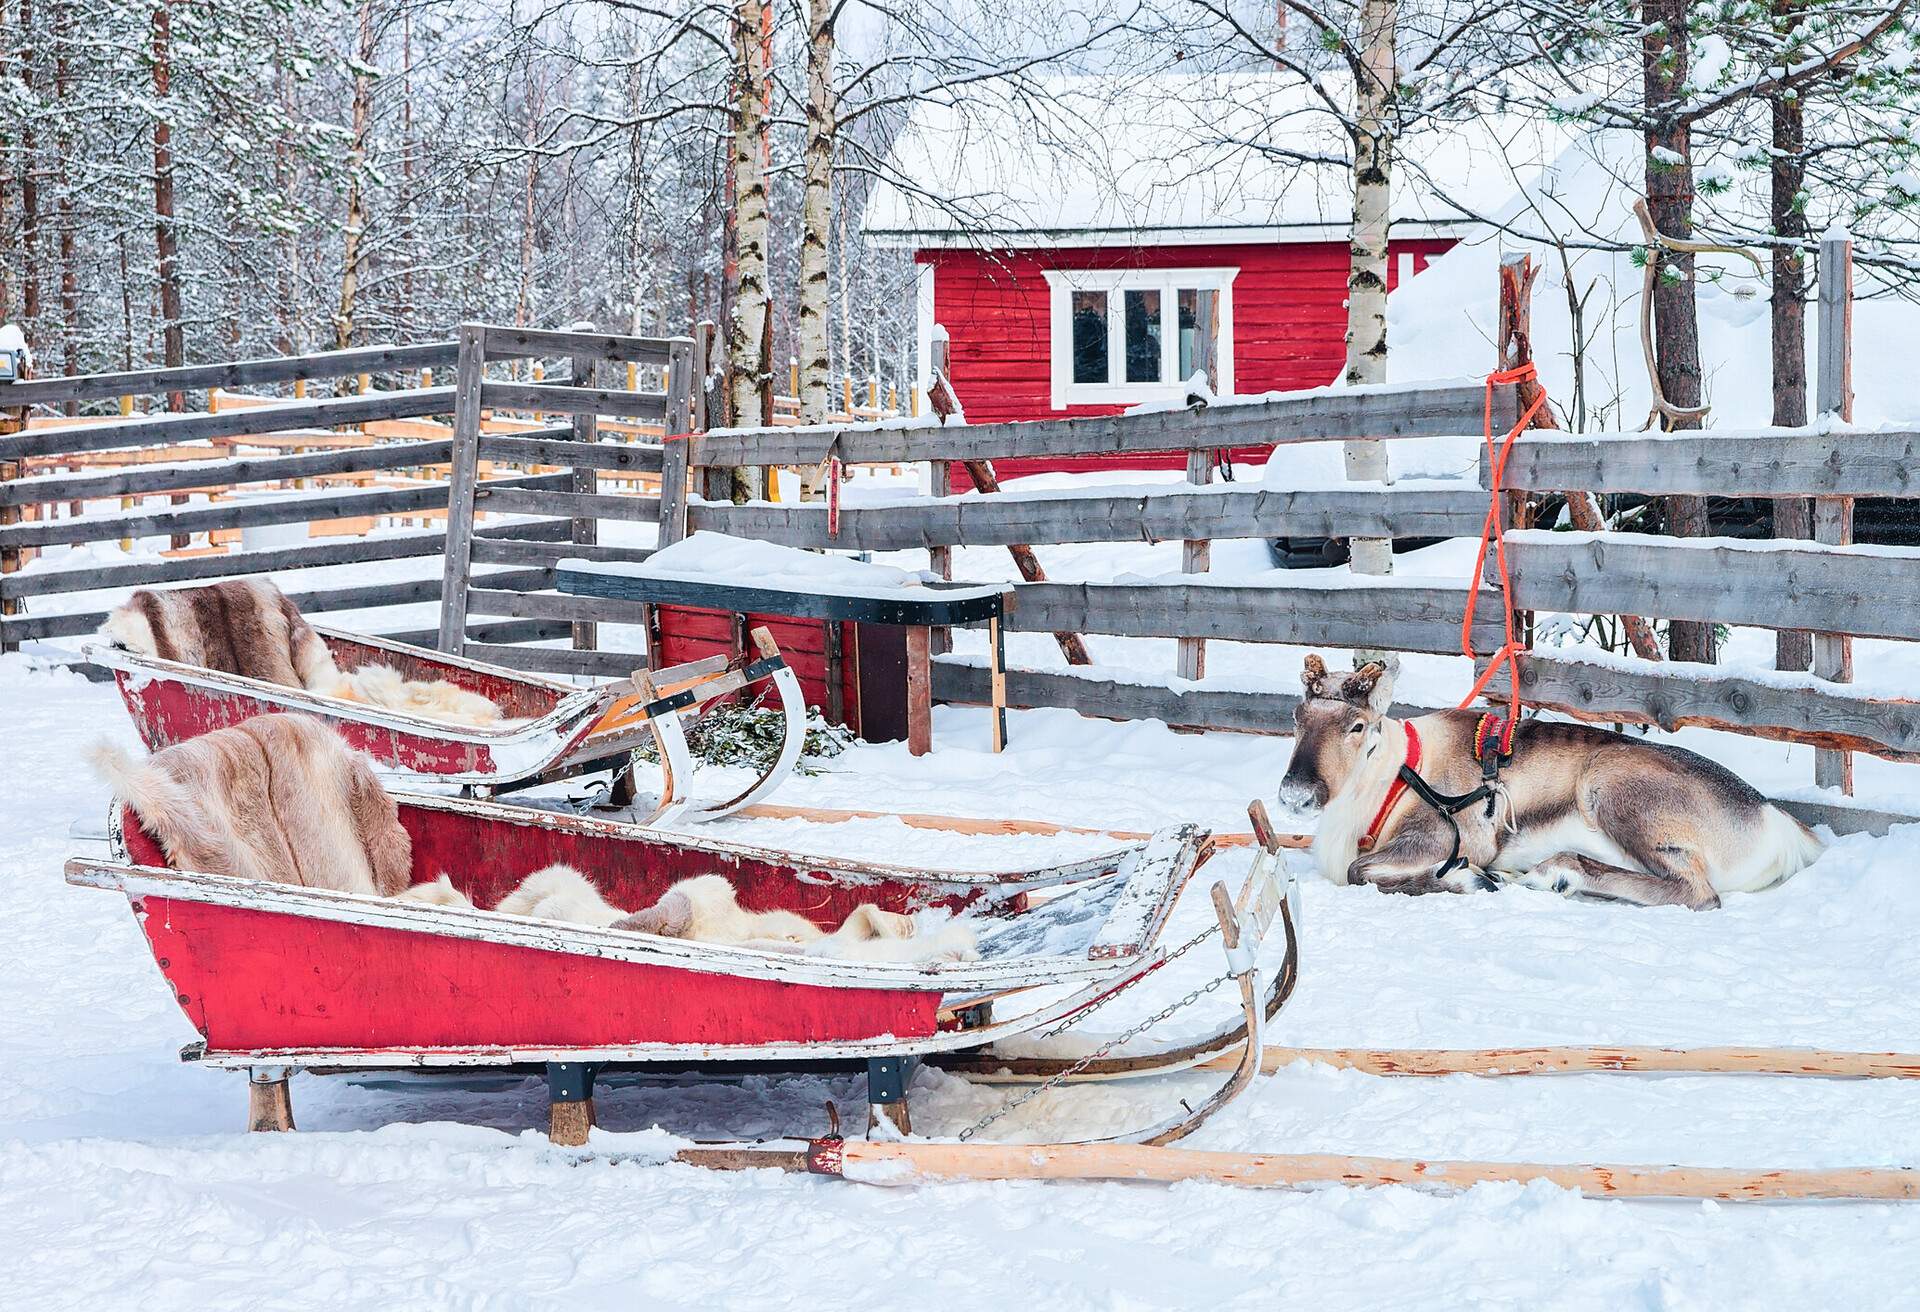 Two red sledges with fur blankets, reindeer tethered to a wooden fence and a red house in a snowy forest.